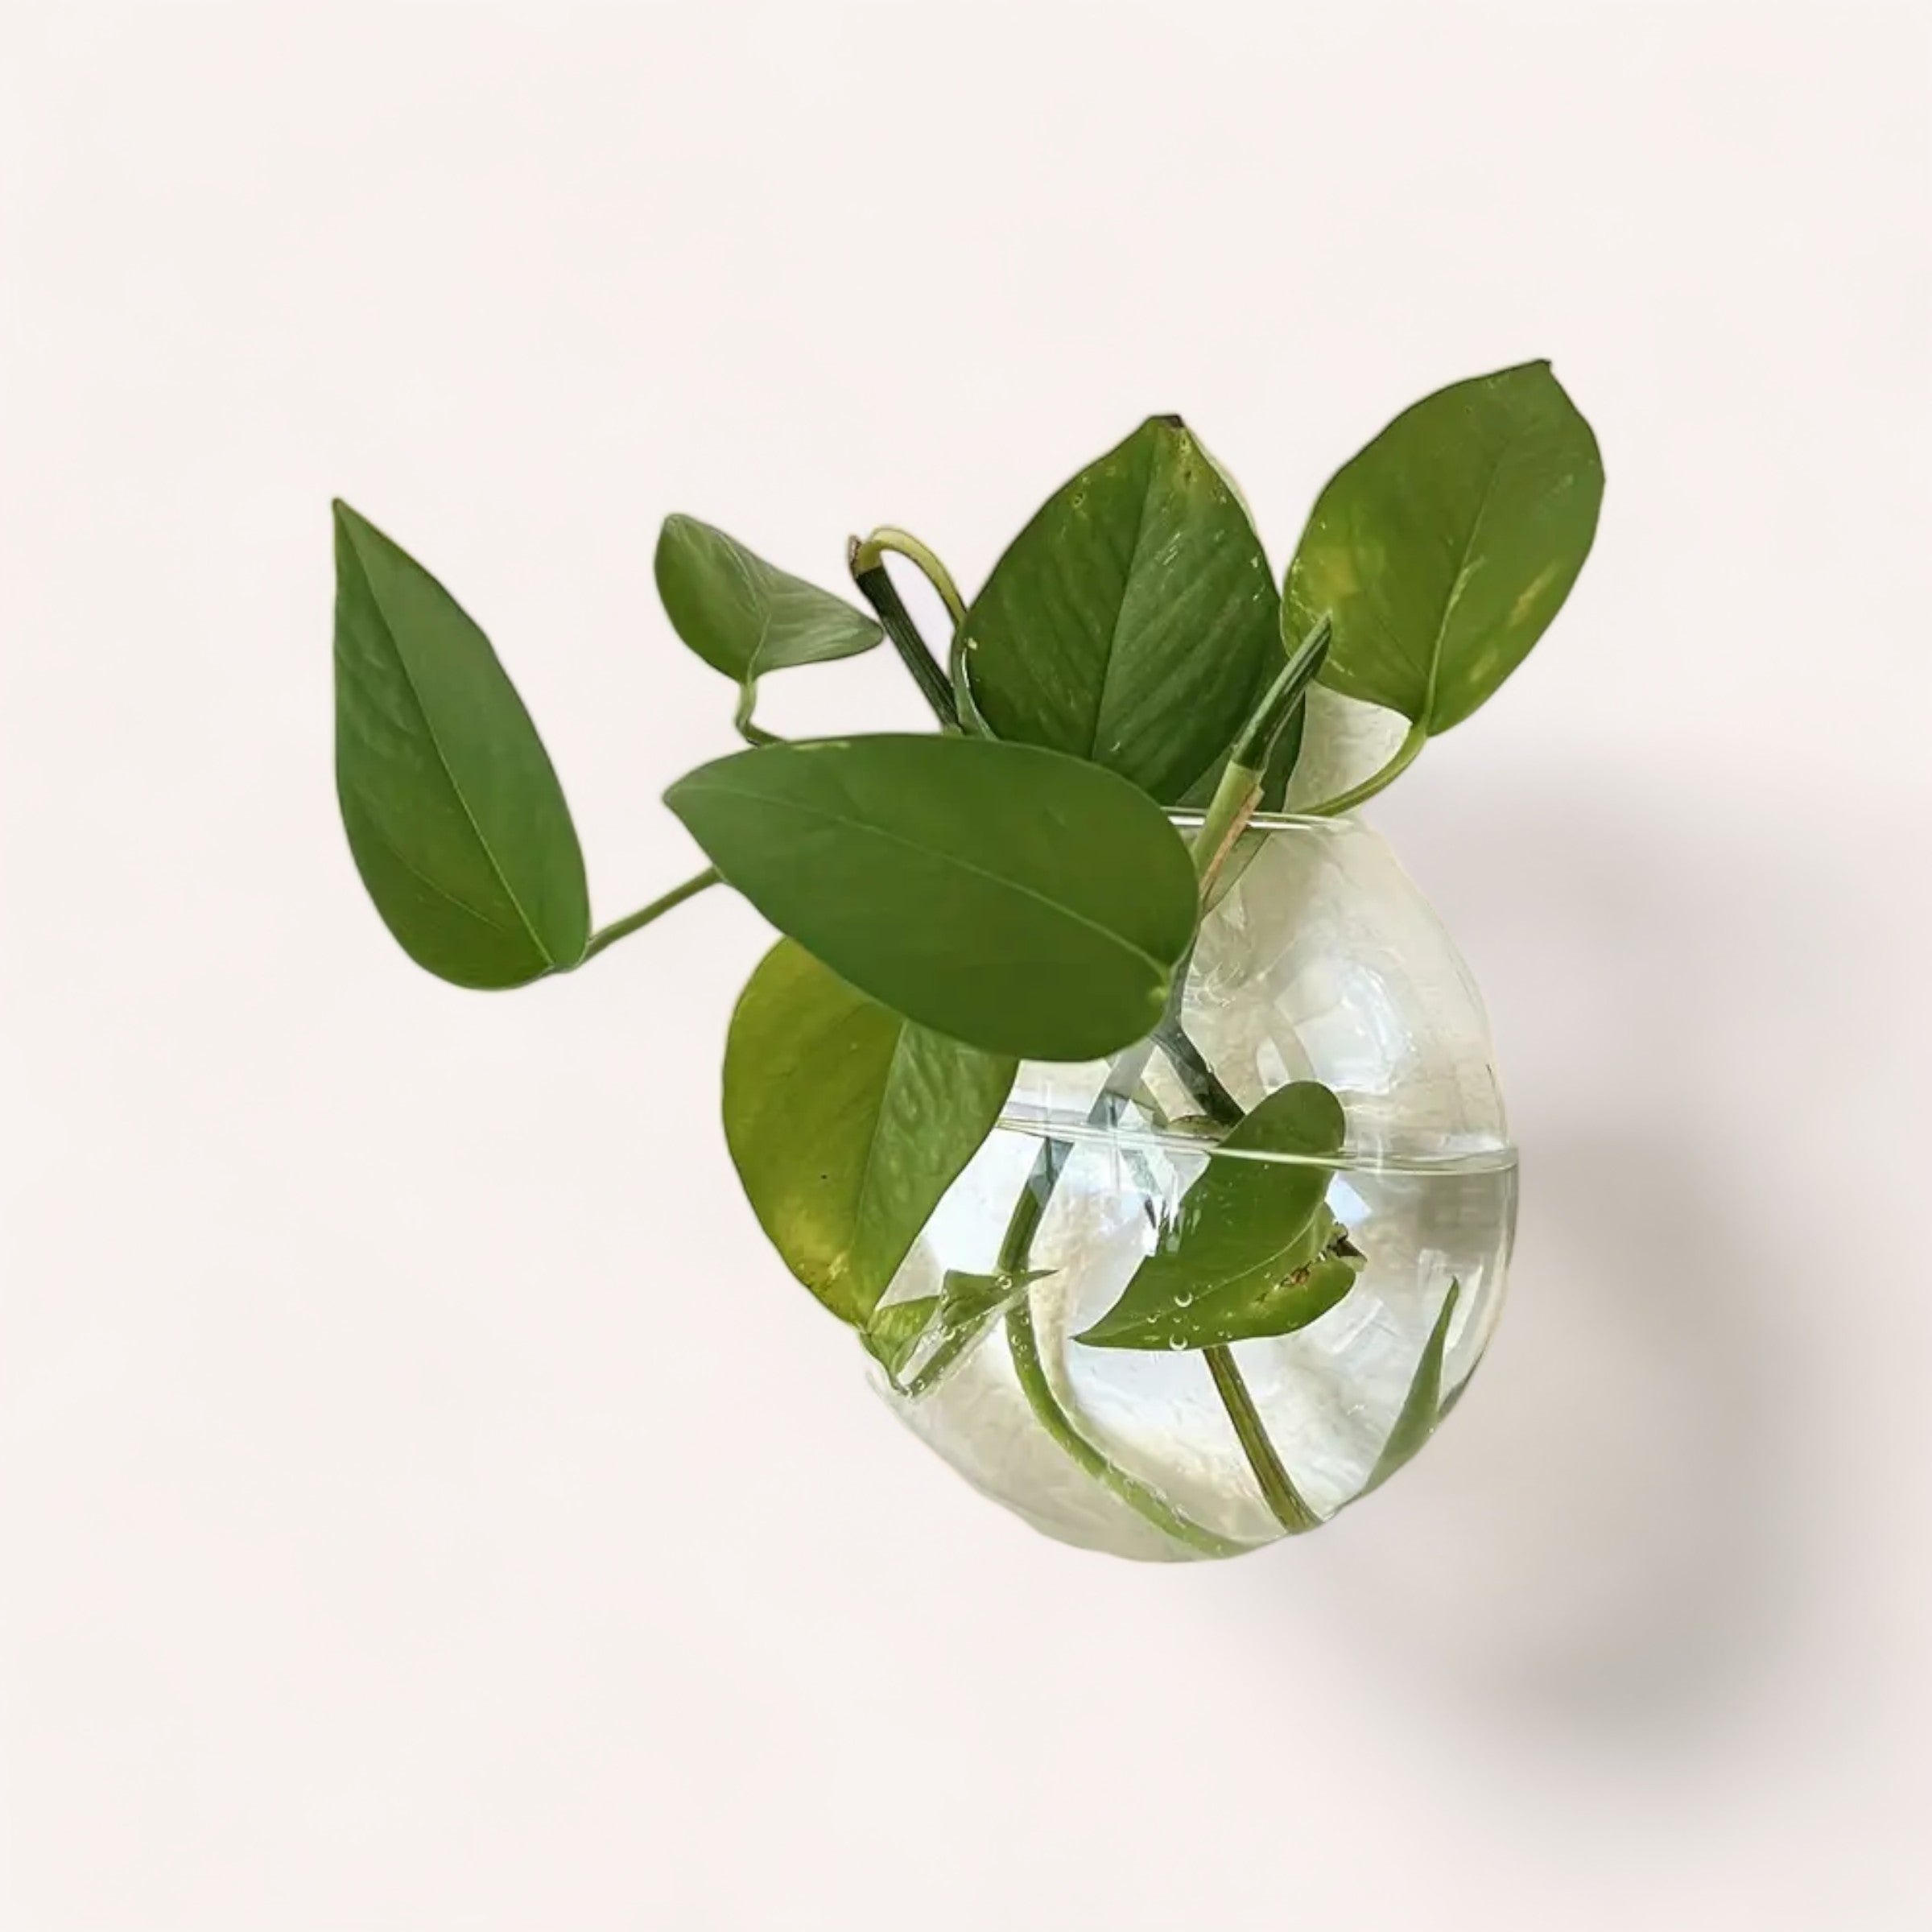 A giftbox co. Glass Terrarium filled with water showcasing a sprig of fresh green plant cuttings, casting a soft shadow on a light, neutral background.